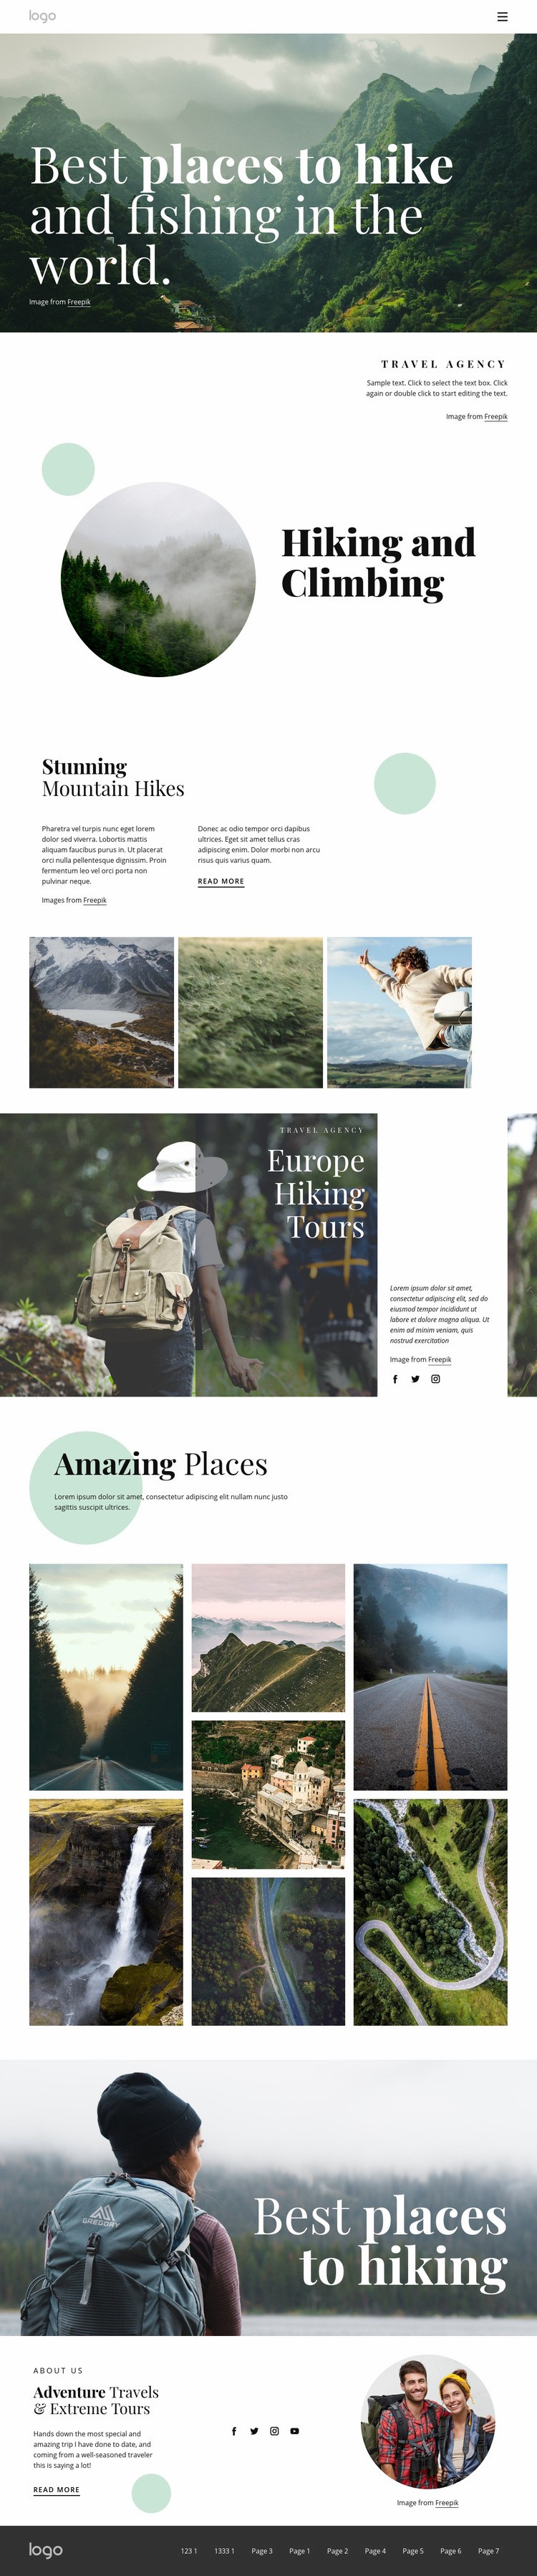 Find your next favorite trail Squarespace Template Alternative